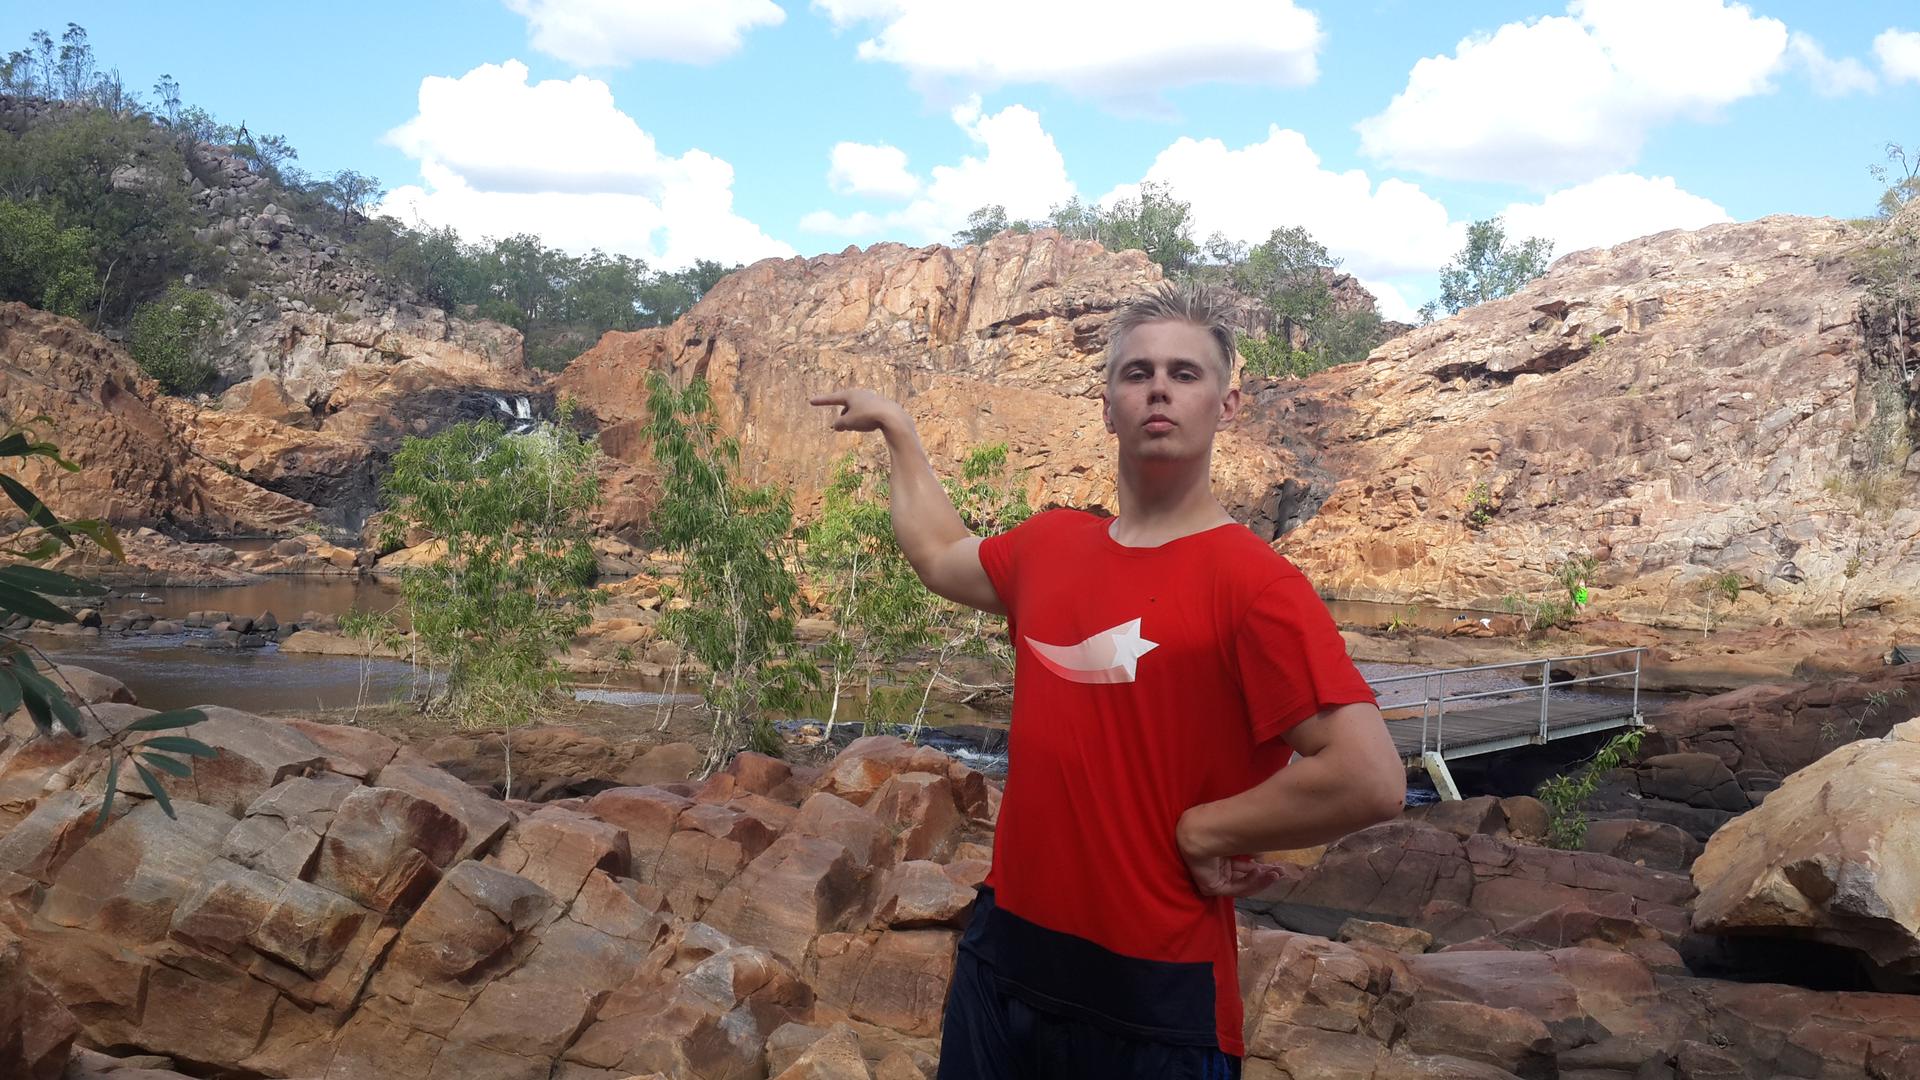 Day 10: Bathing at Edith Falls after a hike in Katherine Corge.